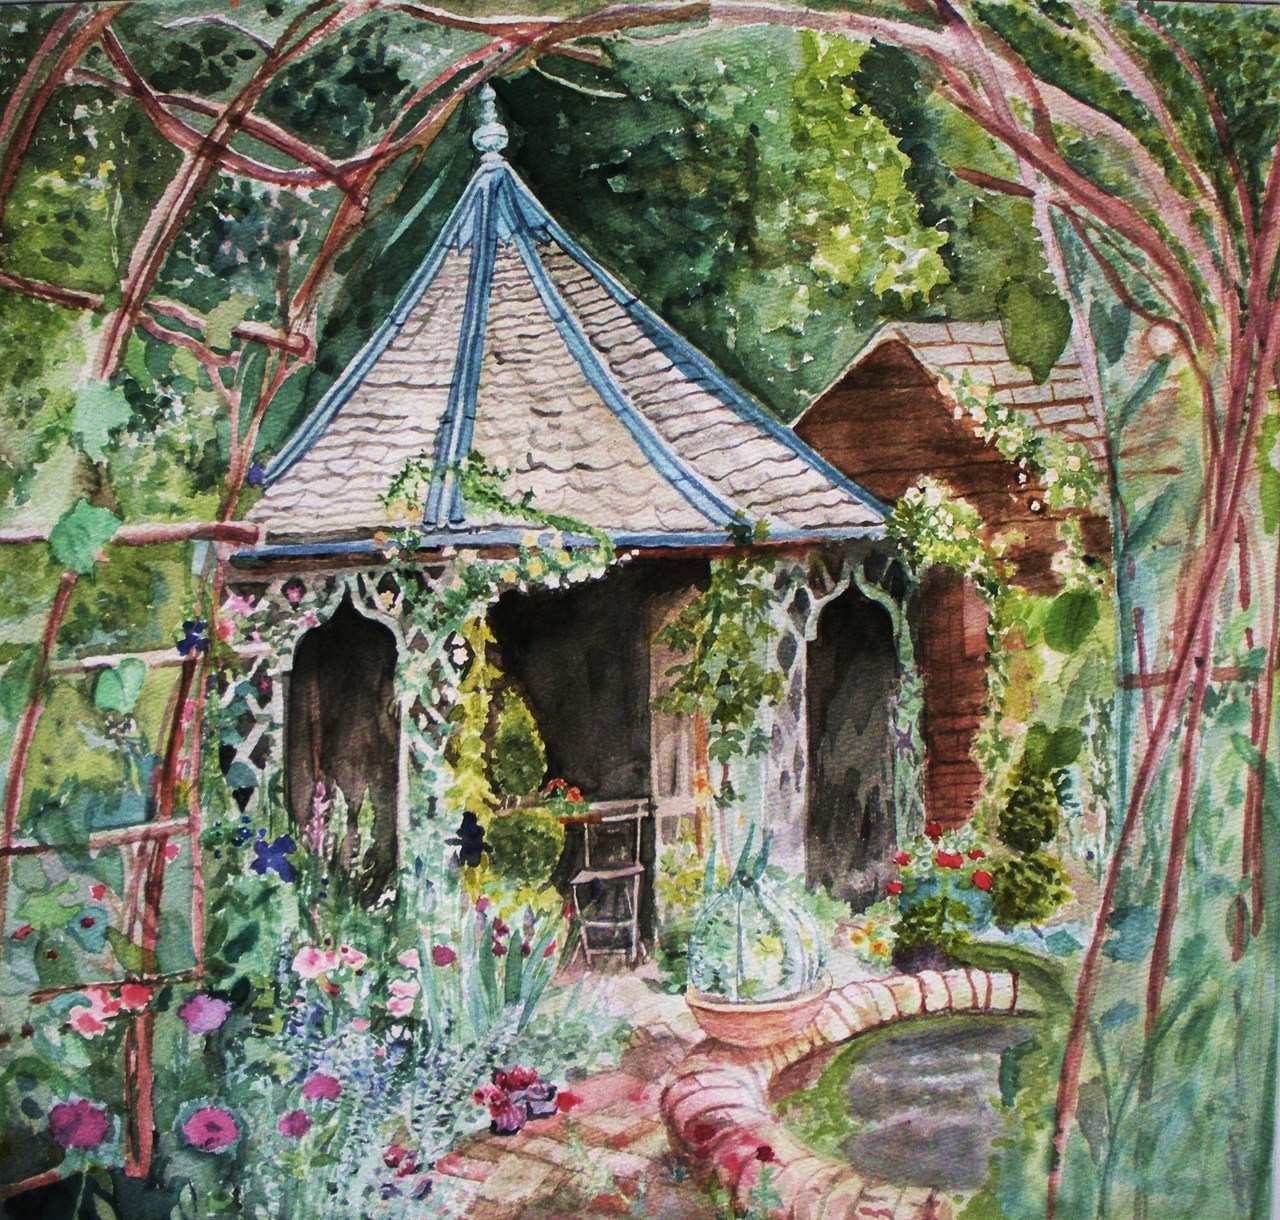 GAZEBO Watercolour painting by Stephanie Köhl, Original available http://stephaniekoehl.npage.de/ For sale as FineArtPrints http://www.mygall.net/product_info.php?info=93146